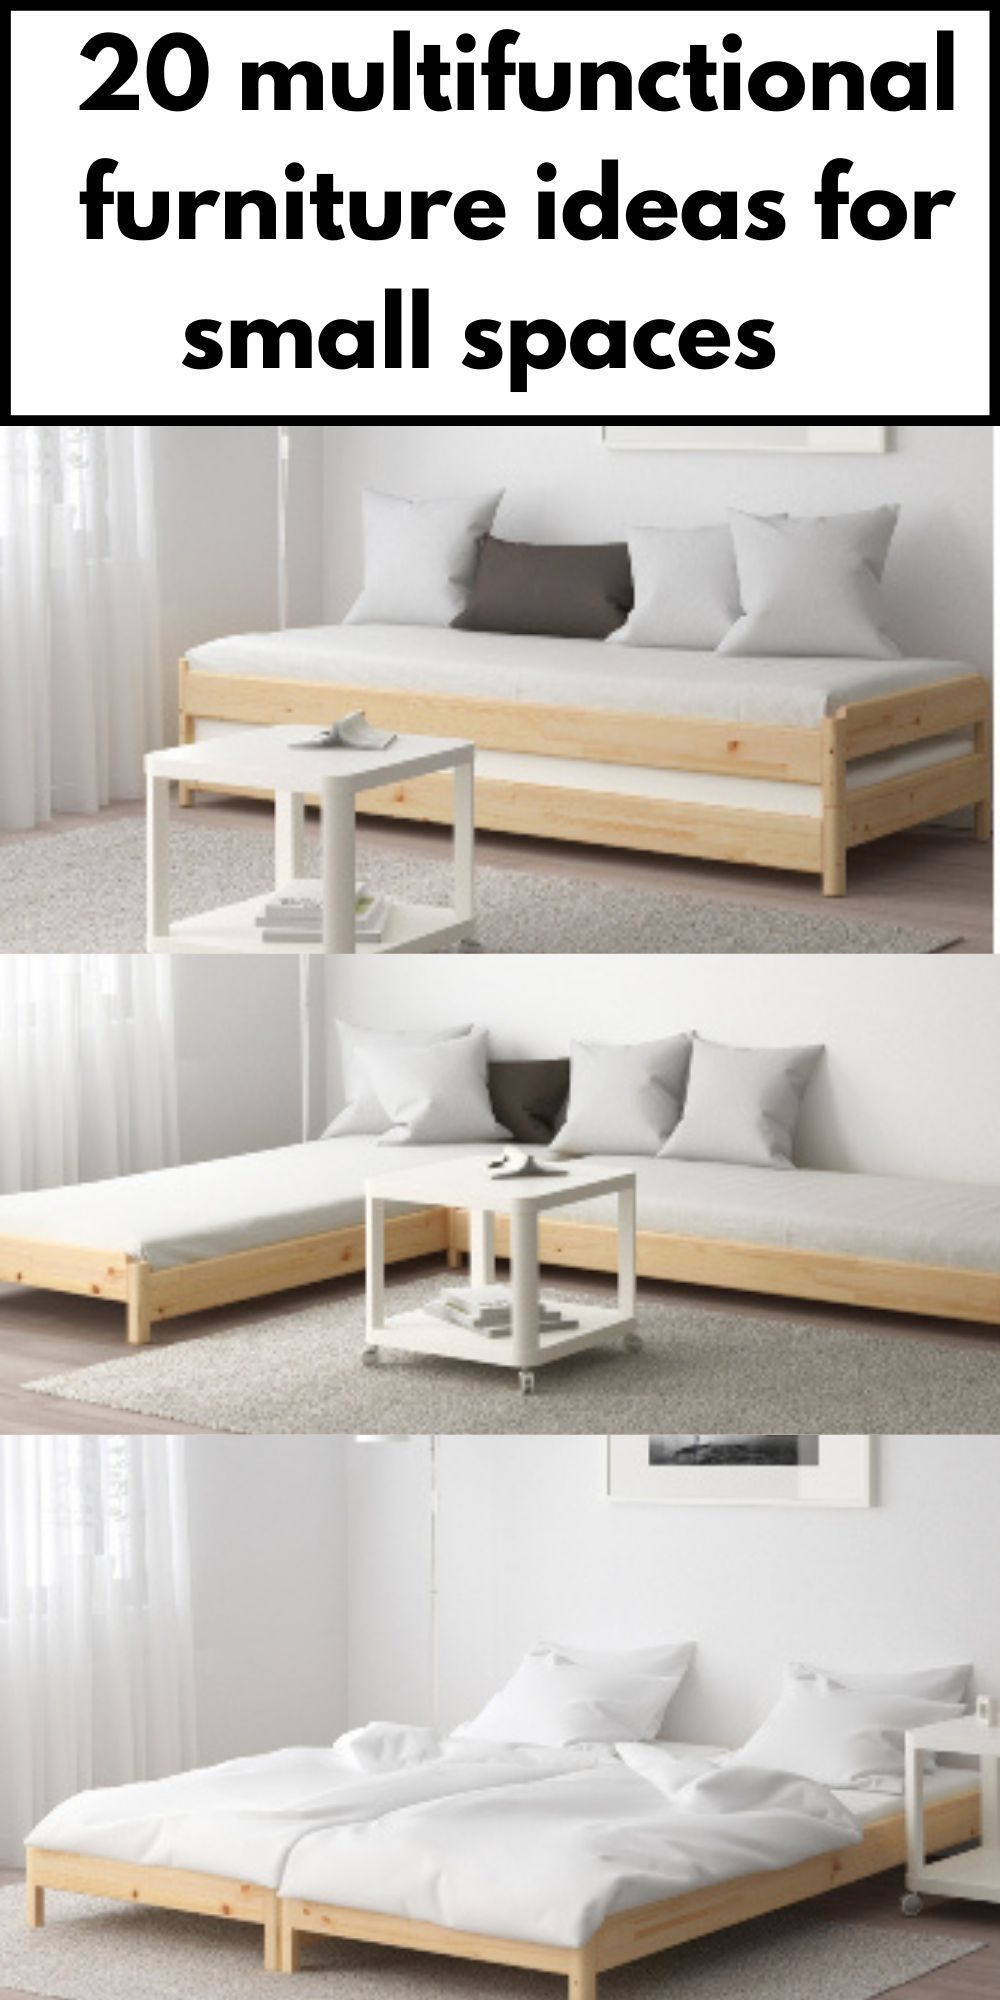 Install bed with sofa to enhance the
living room